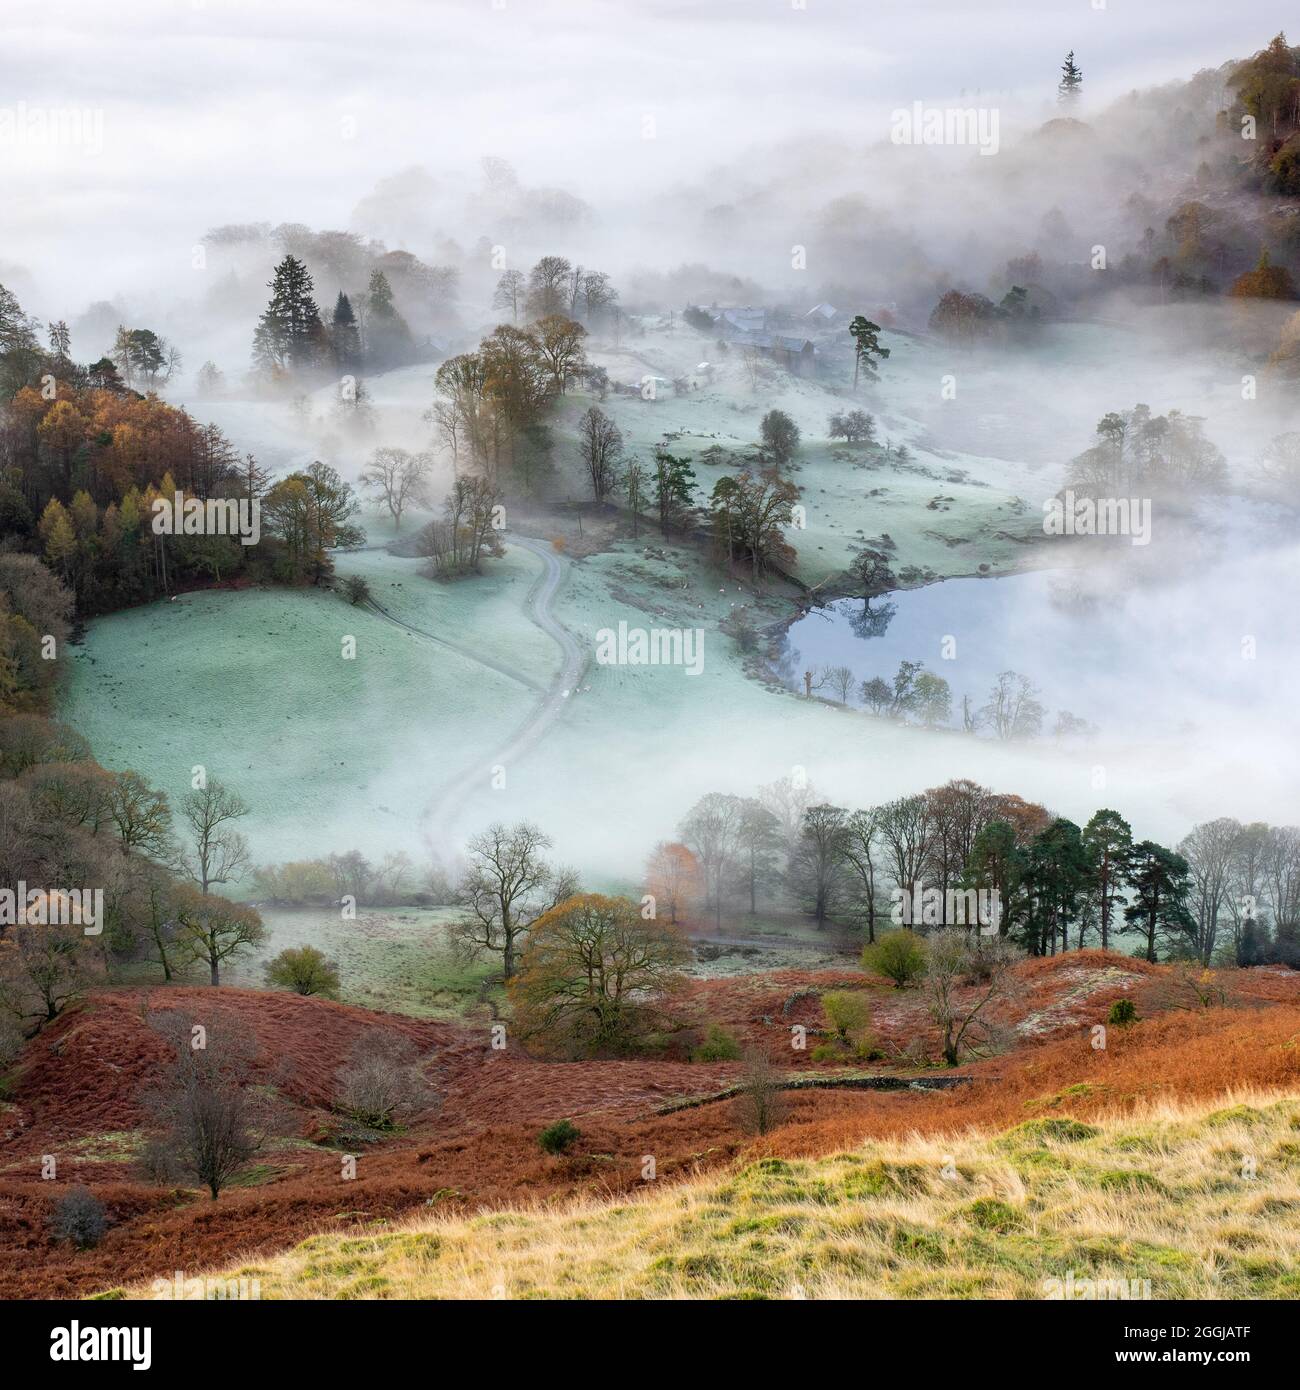 A layer of mist covers the frosty landscape around Loughrigg Tarn on a chilly autumn morning in the English Lake District, moments before sunrise. Stock Photo